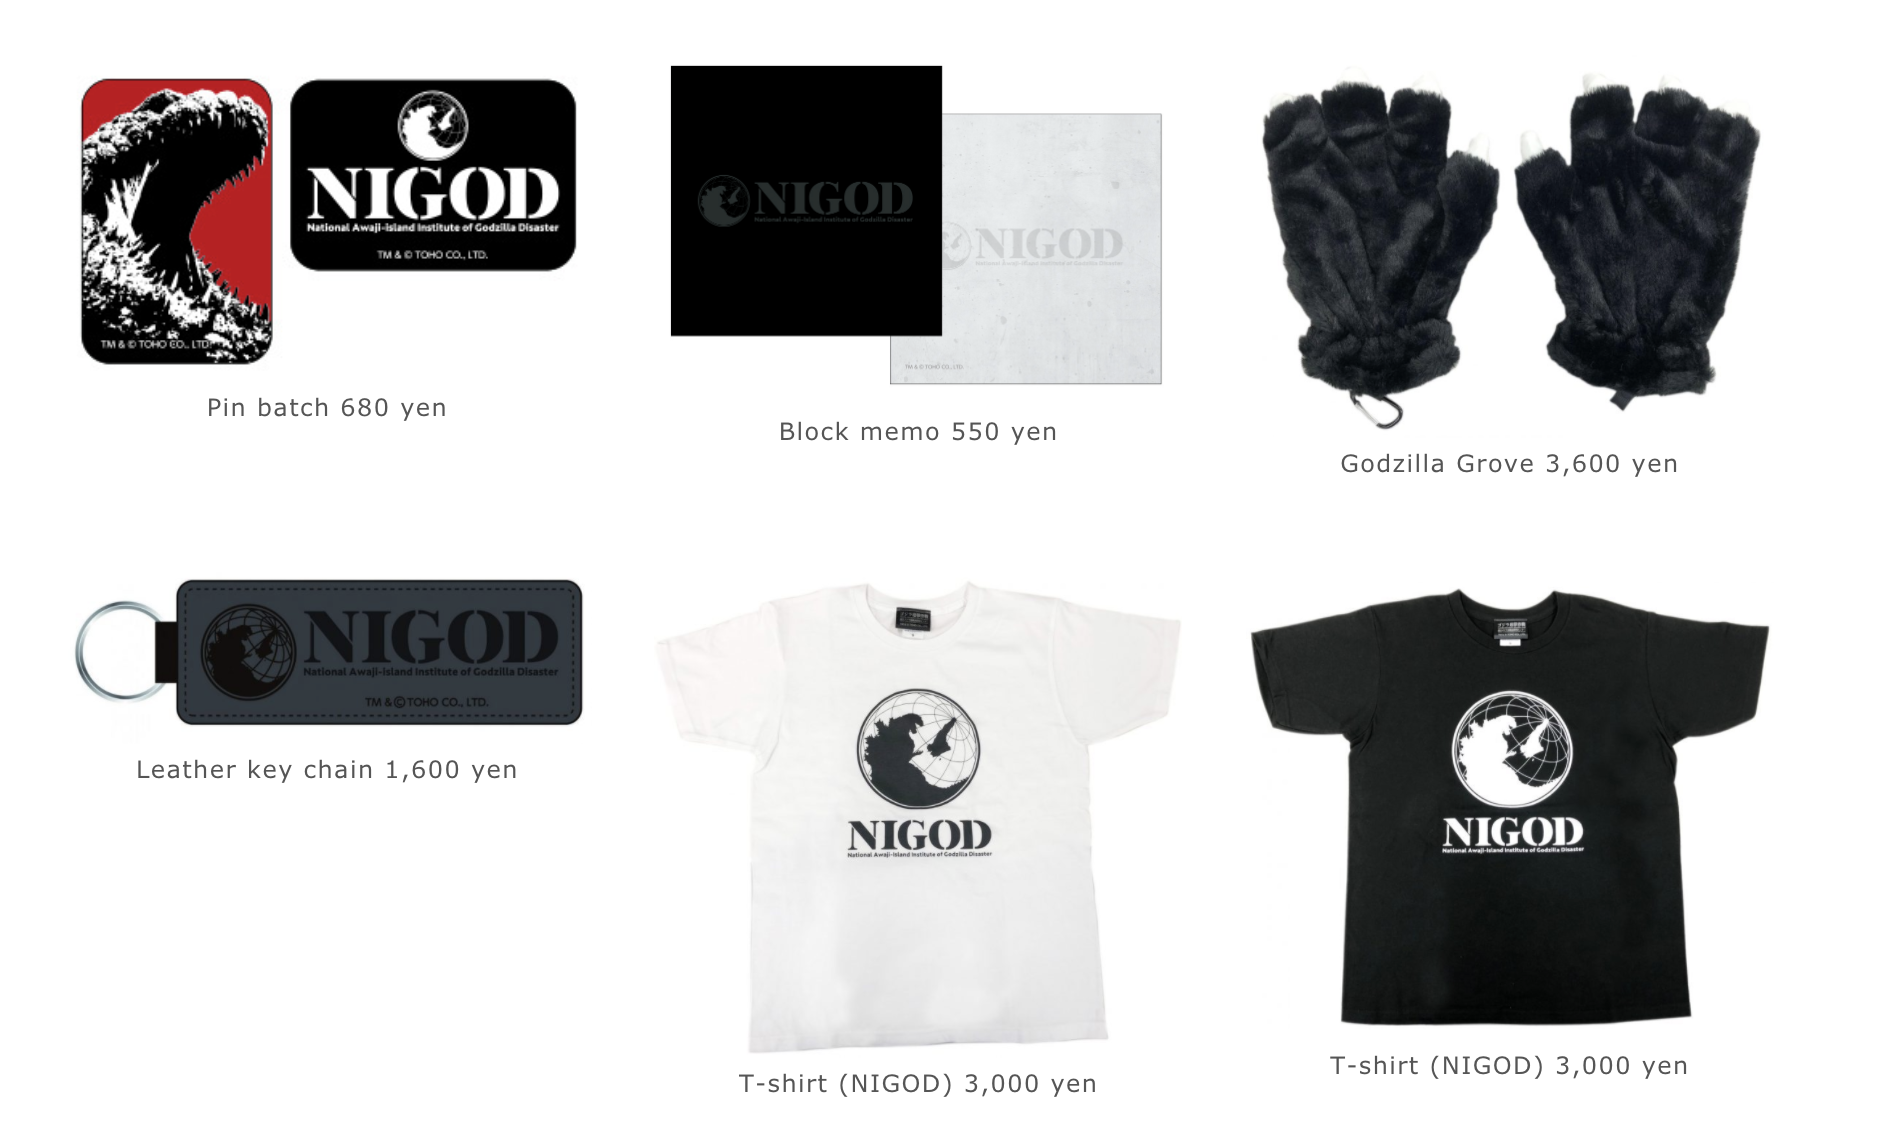 A display of Godzilla-themed souvenirs, including pins, gloves, shirts, and a key chain